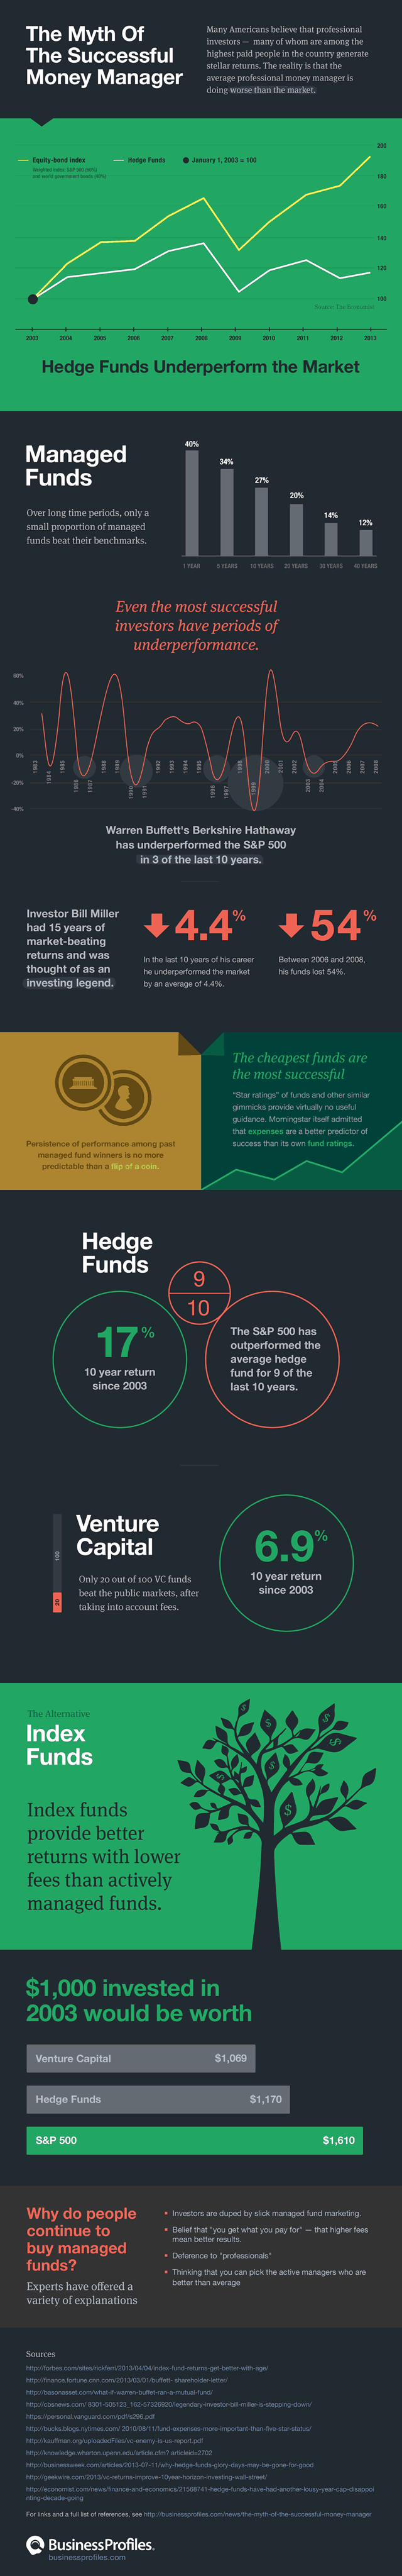 infographic on investing